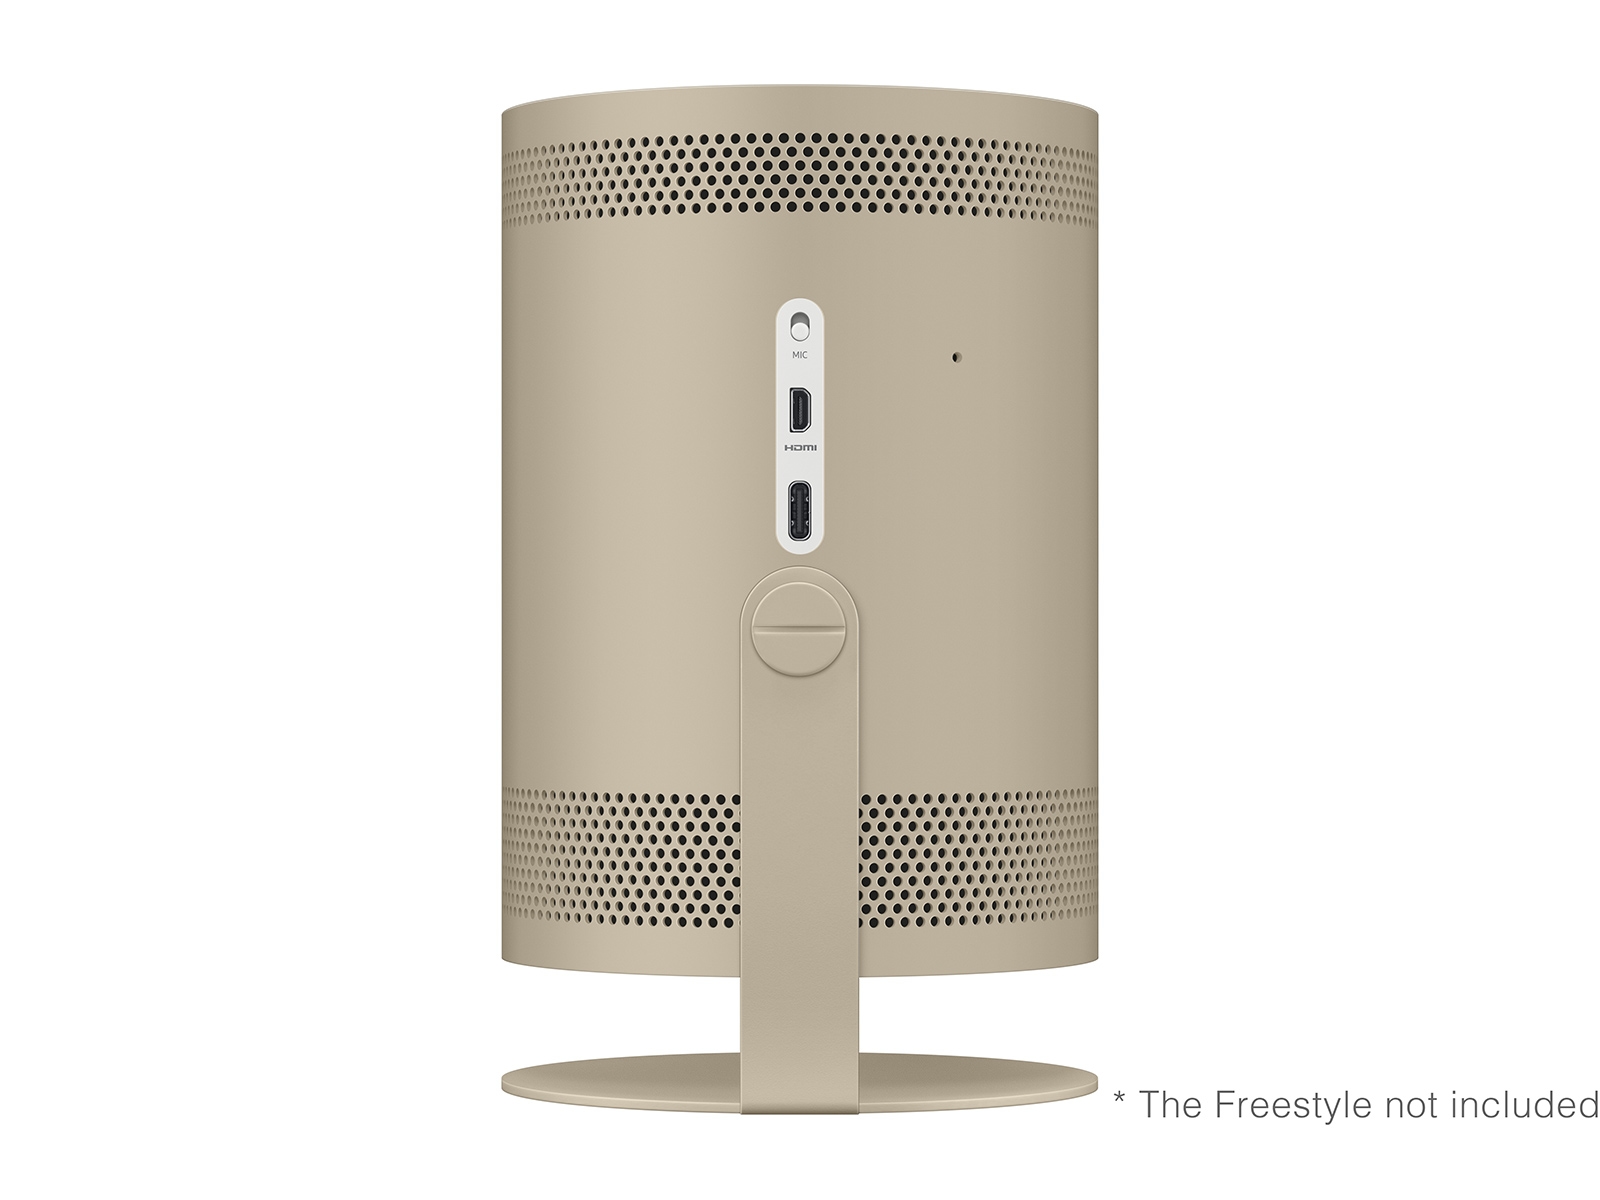 Thumbnail image of The Freestyle Skin and Cradle: Coyote Beige